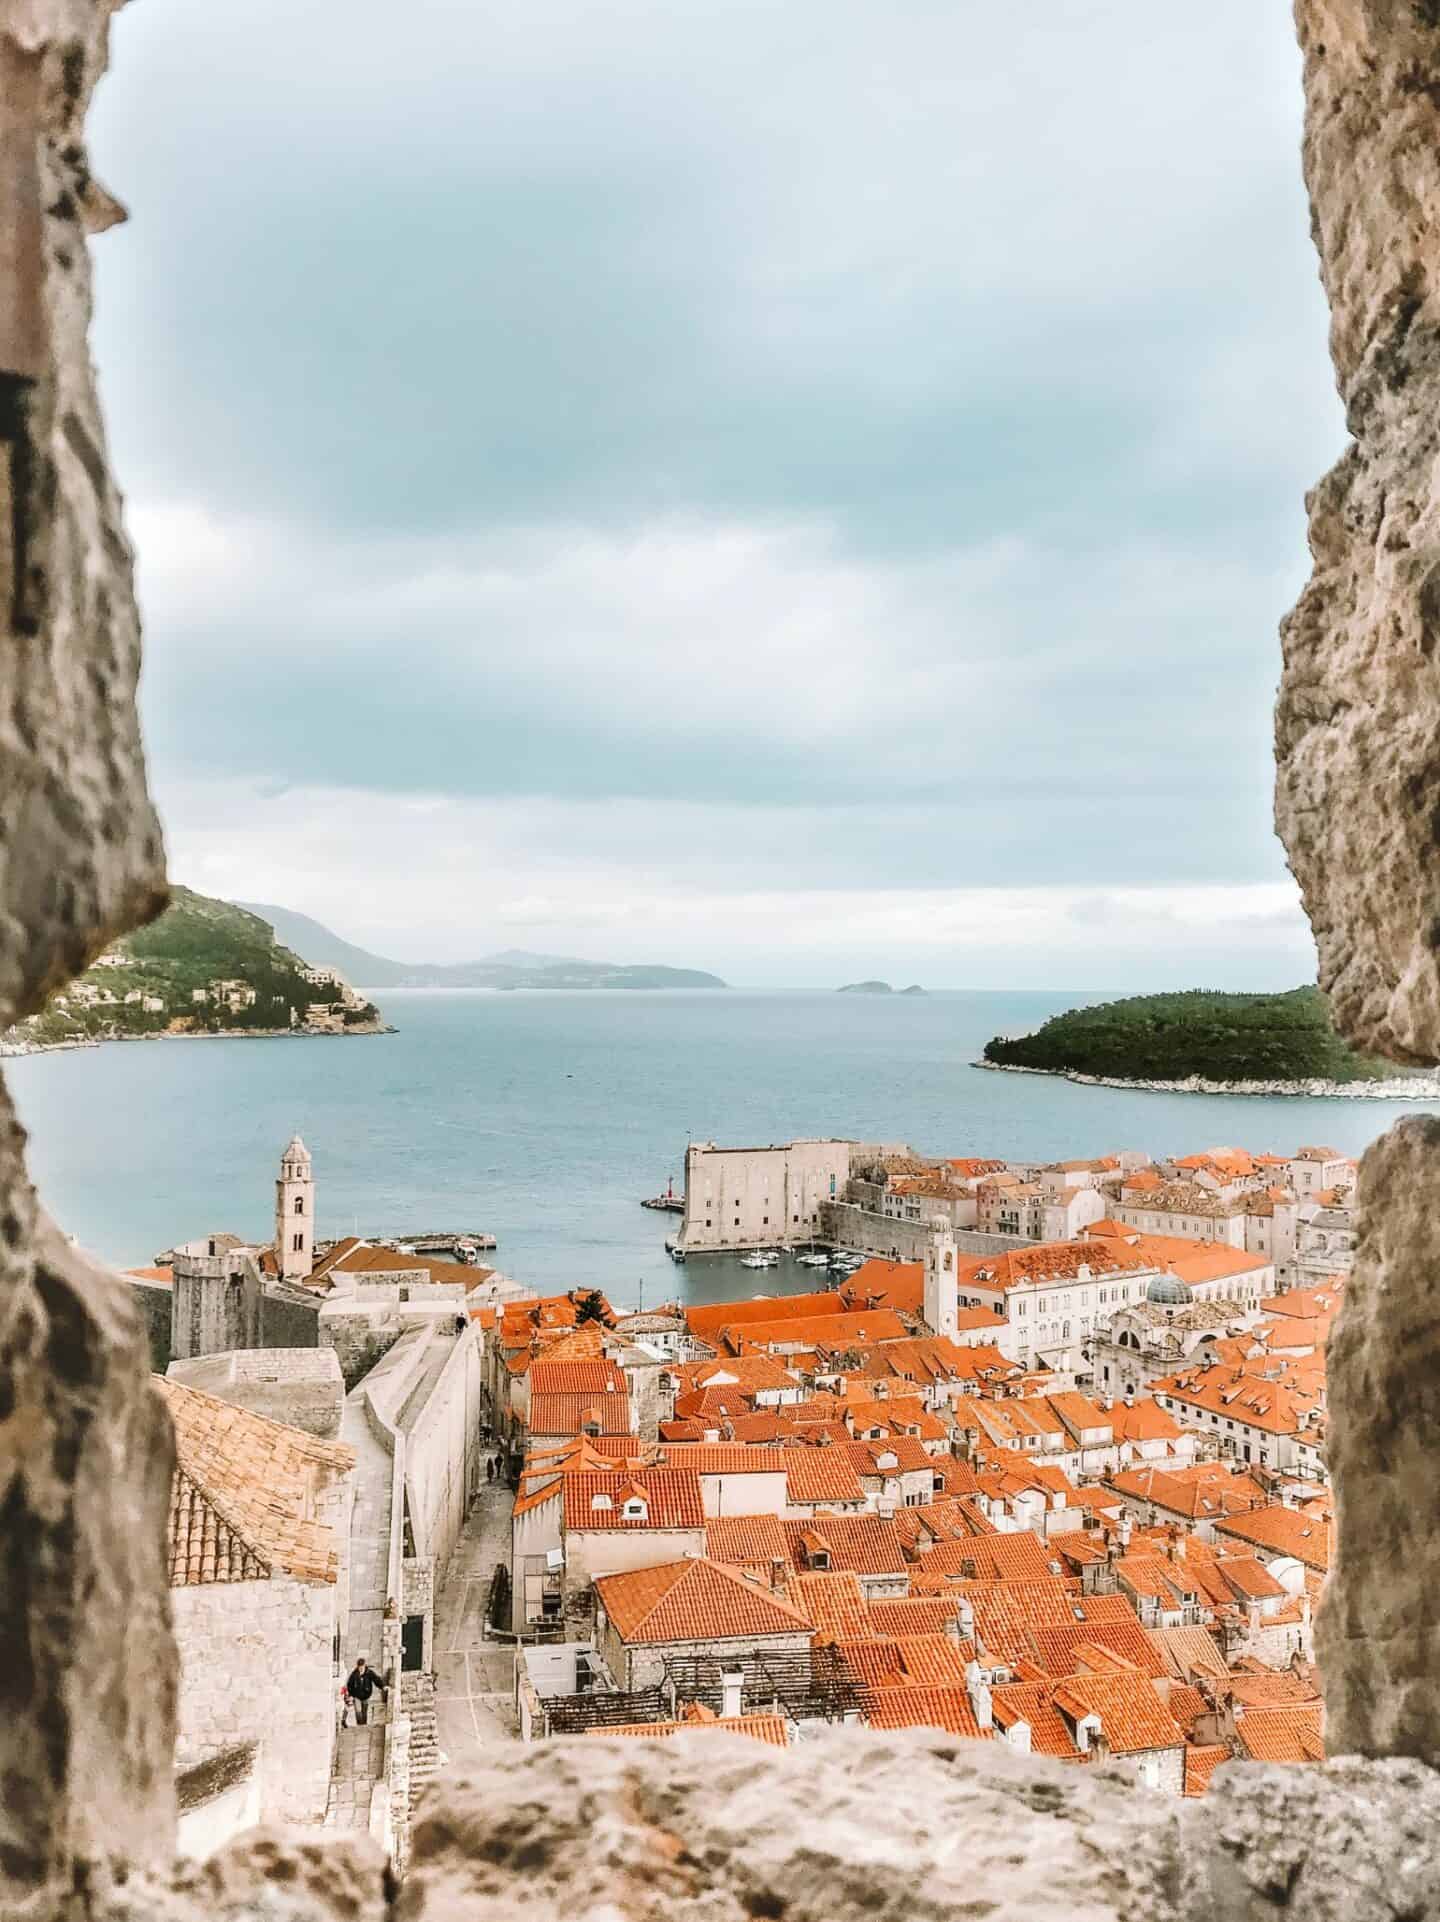 Hiking the city walls in Dubrovnik – a must-do on any 5 days in Dubrovnik itinerary